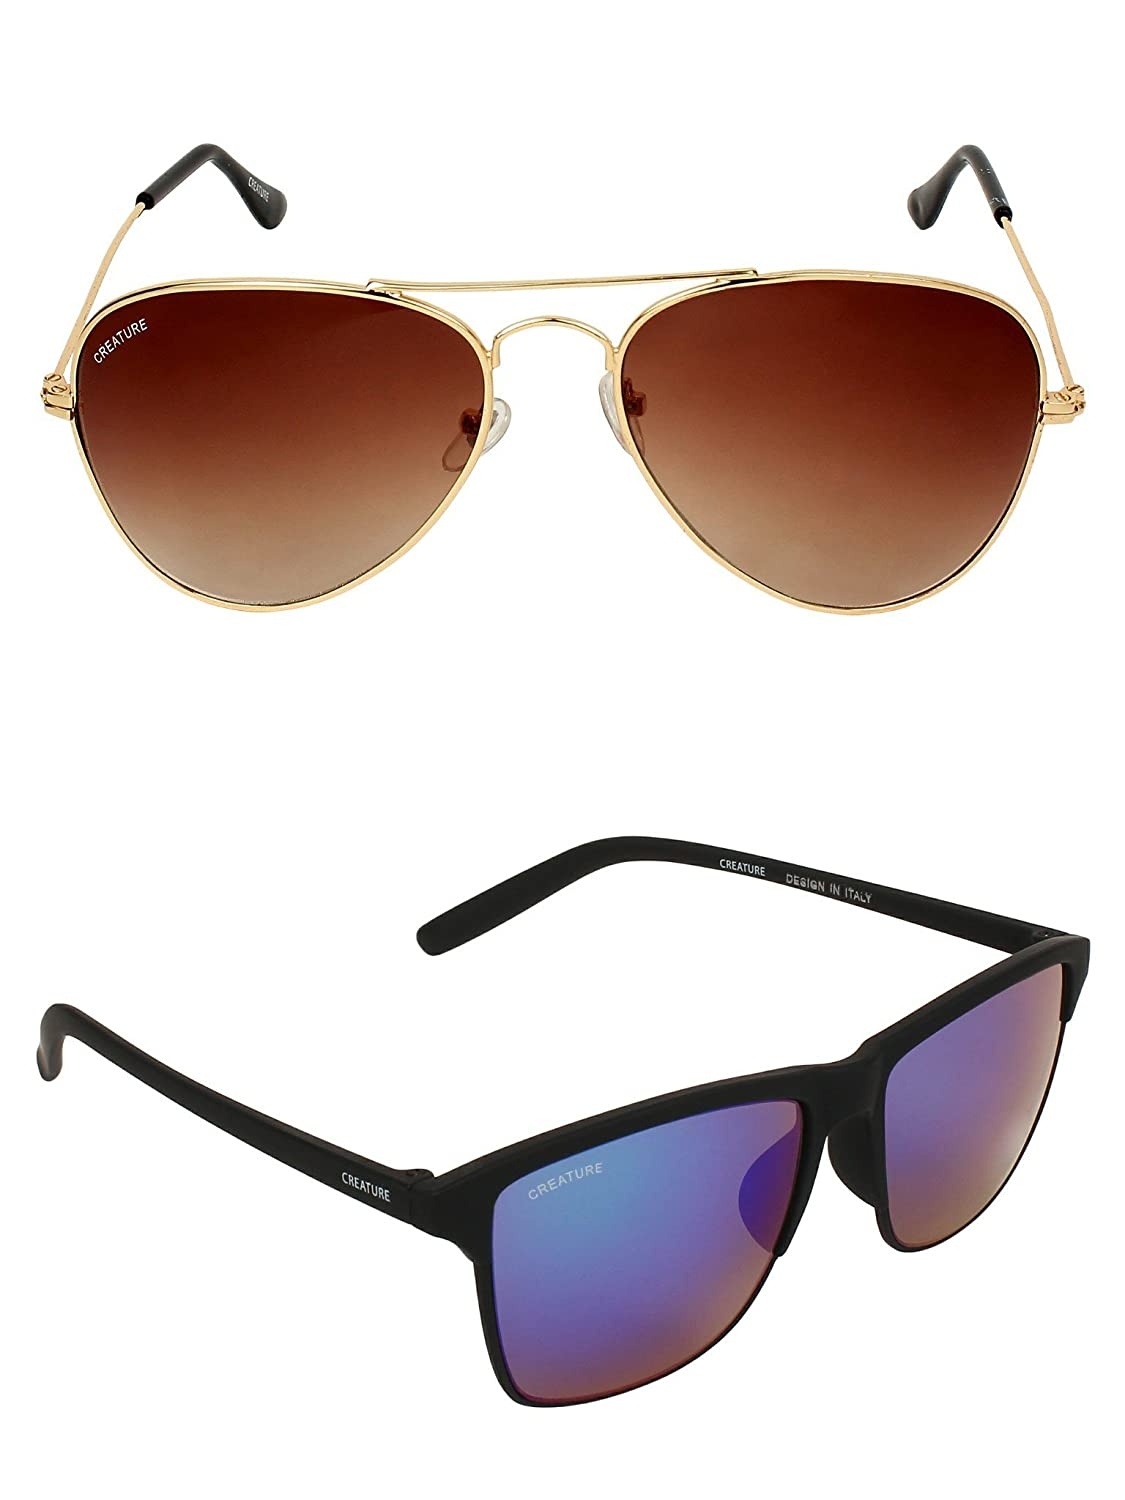 CREATURE | CREATURE Brown Aviator & Multicolour Sunglasses Combo with UV Protection (Lens-Brown & Multiclour|Frame-Golden & Black)